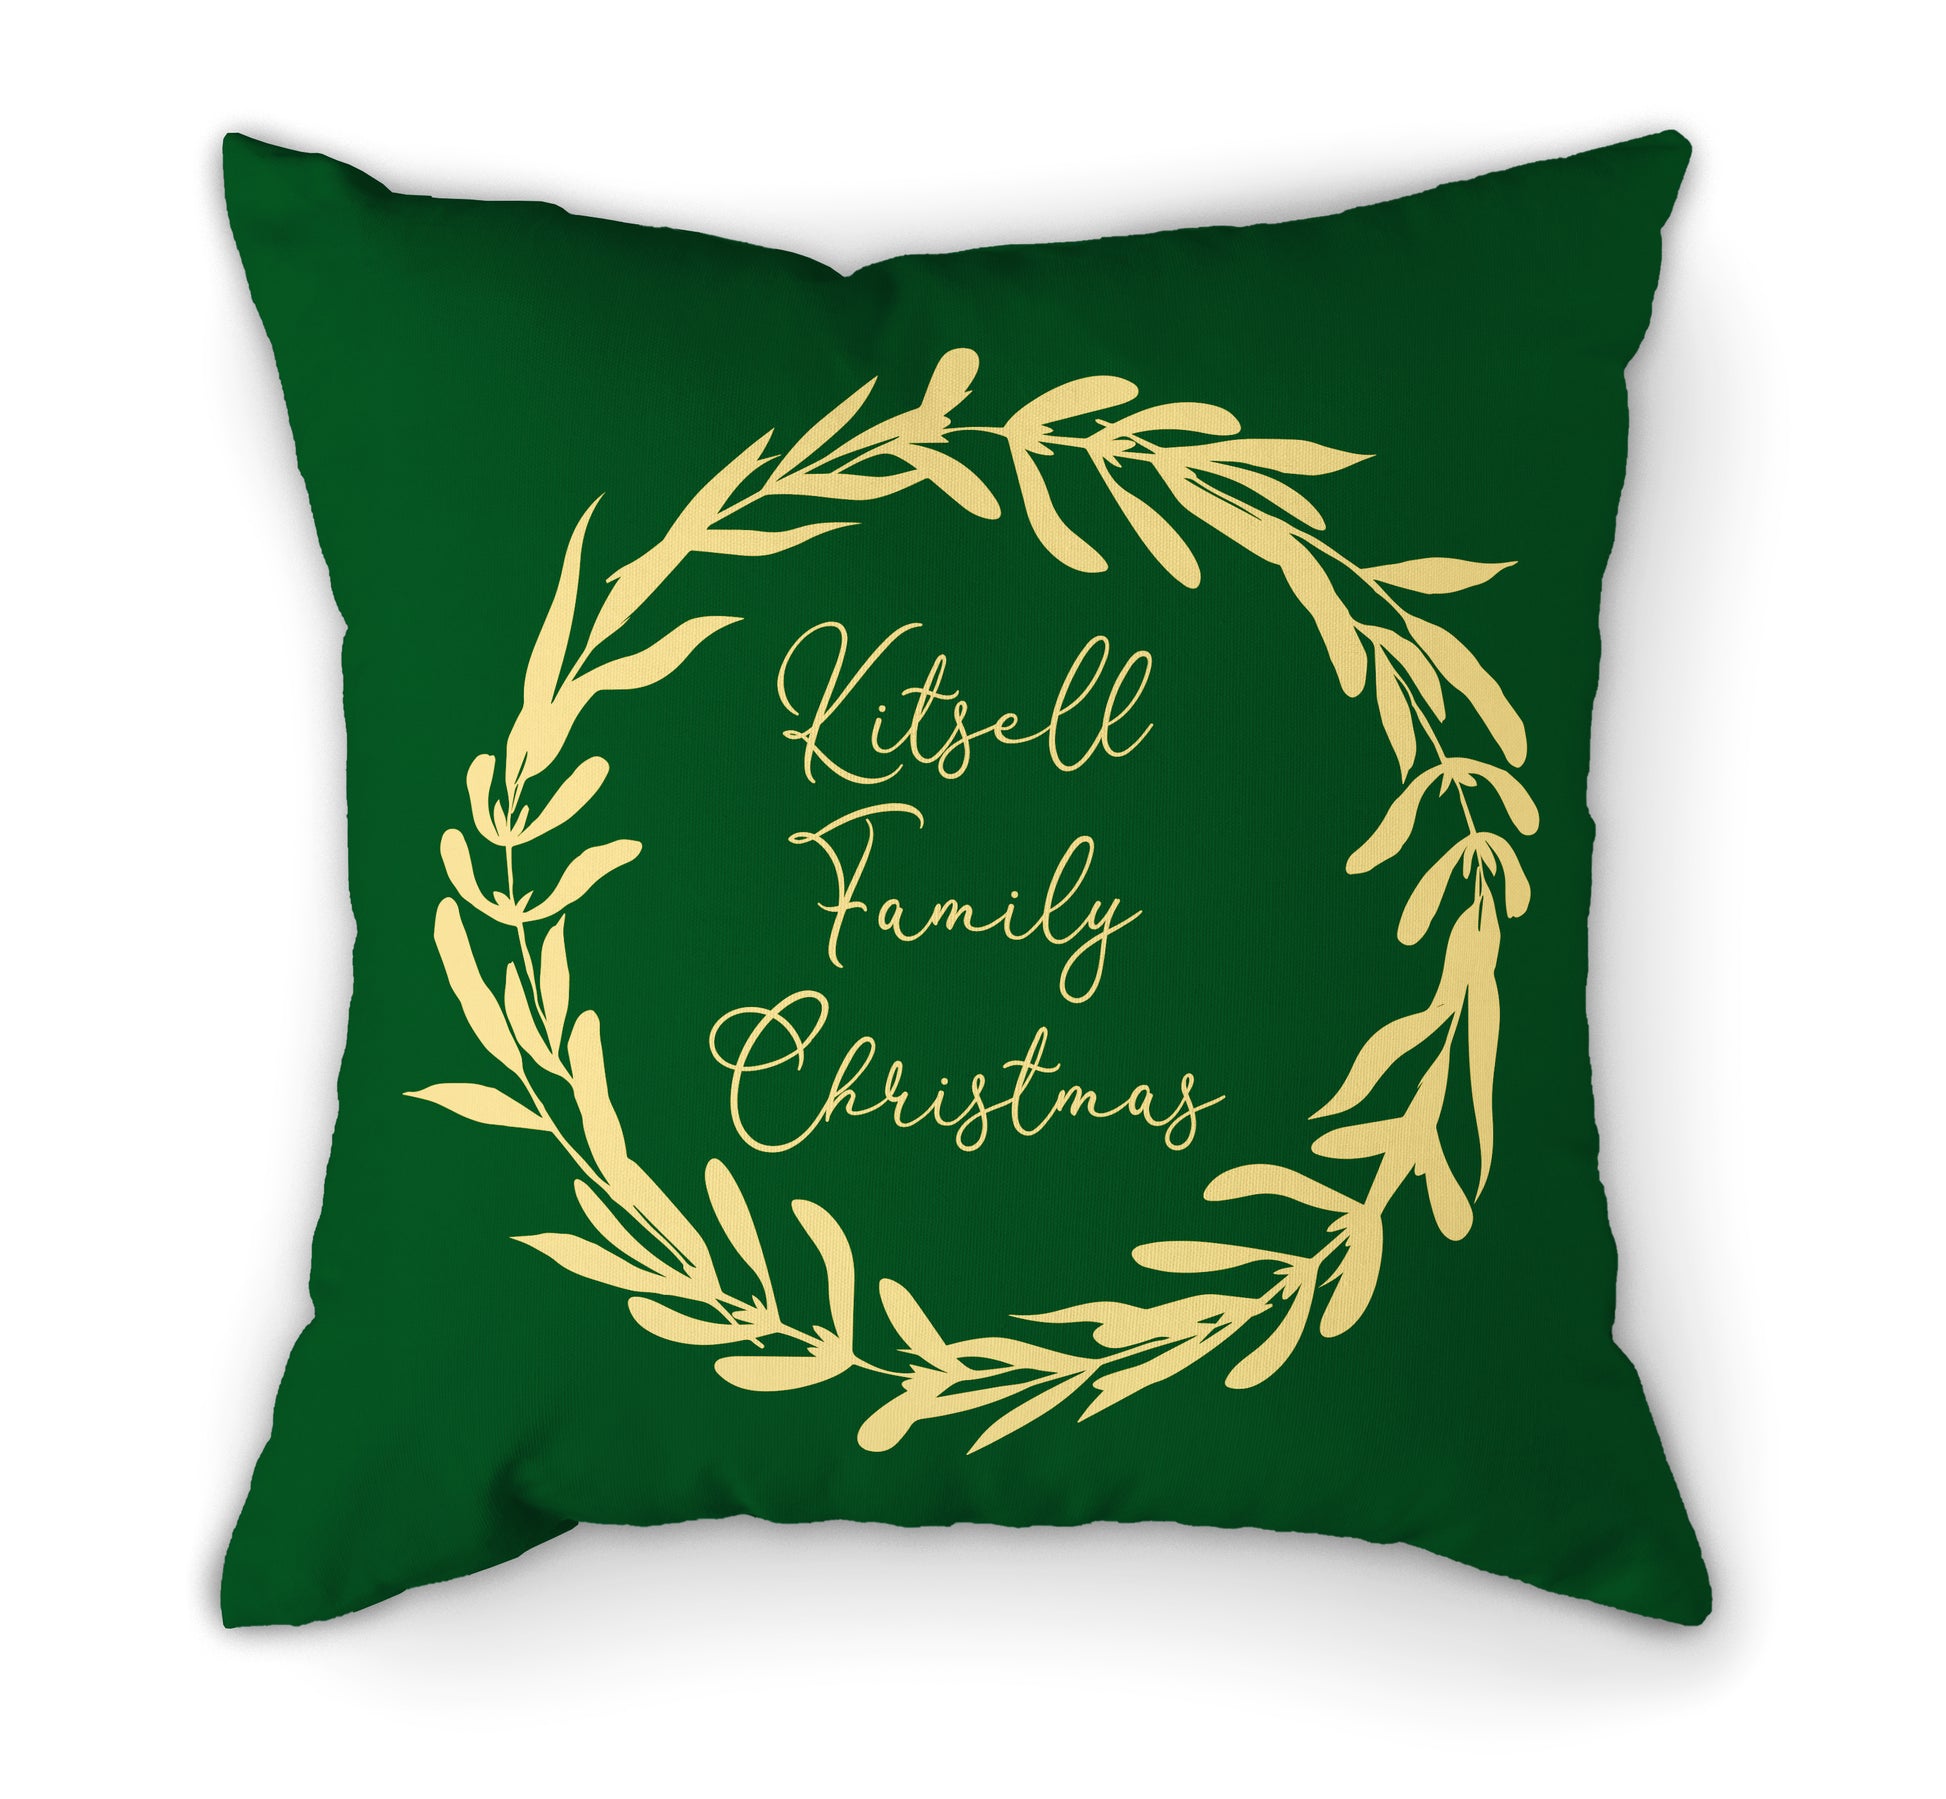 Personalised Green Cushion Christmas Wreath Family 